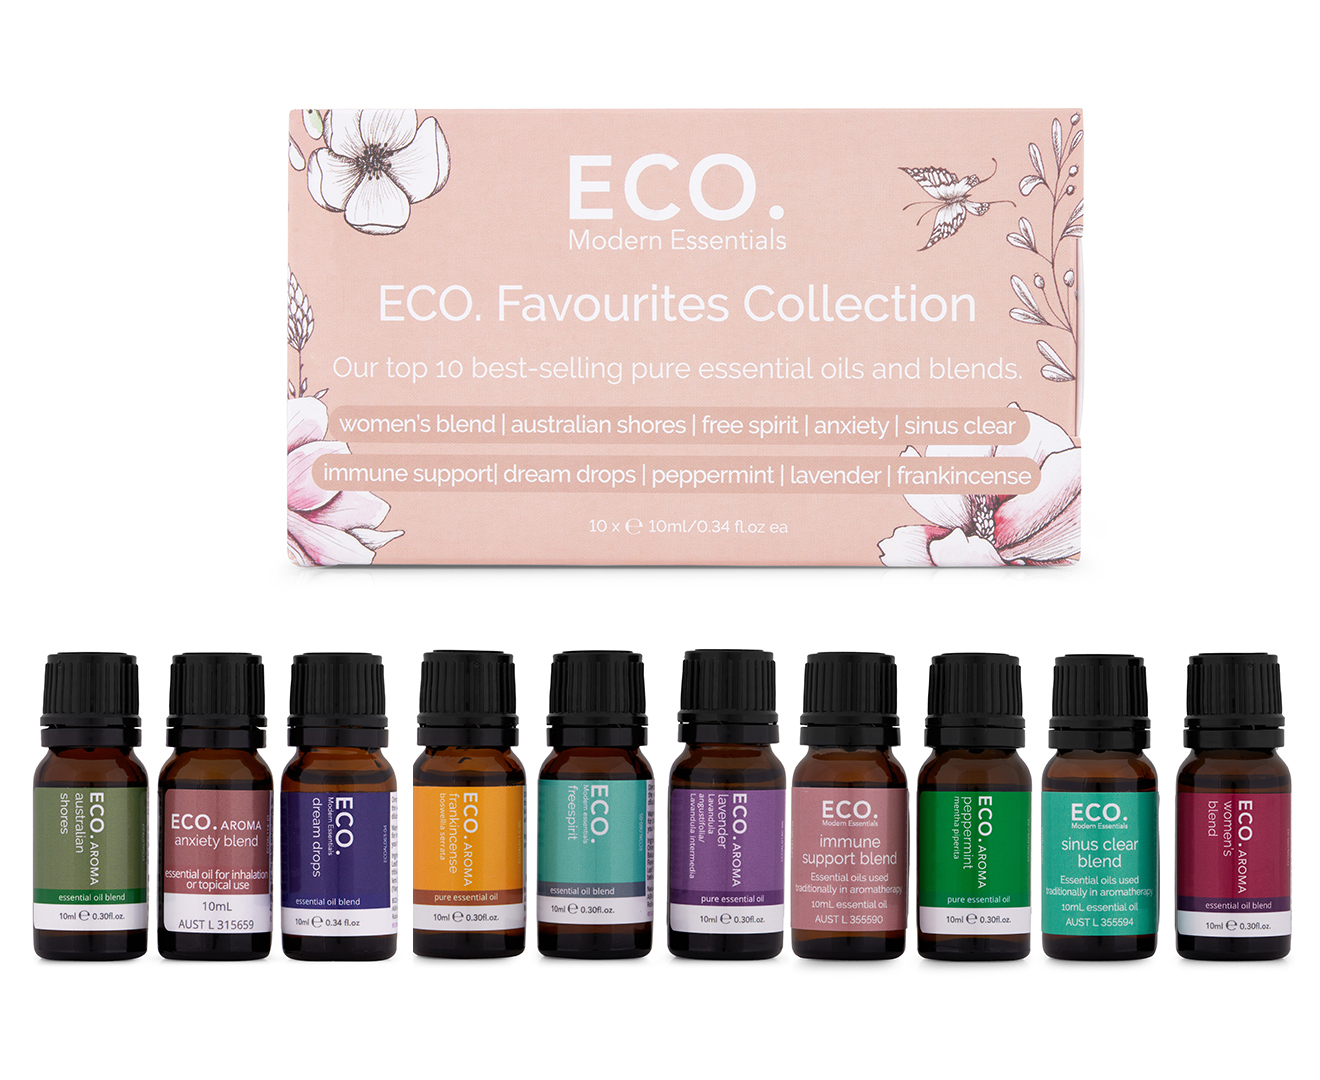 Best-selling Blends Collection – ECO. Modern Essentials